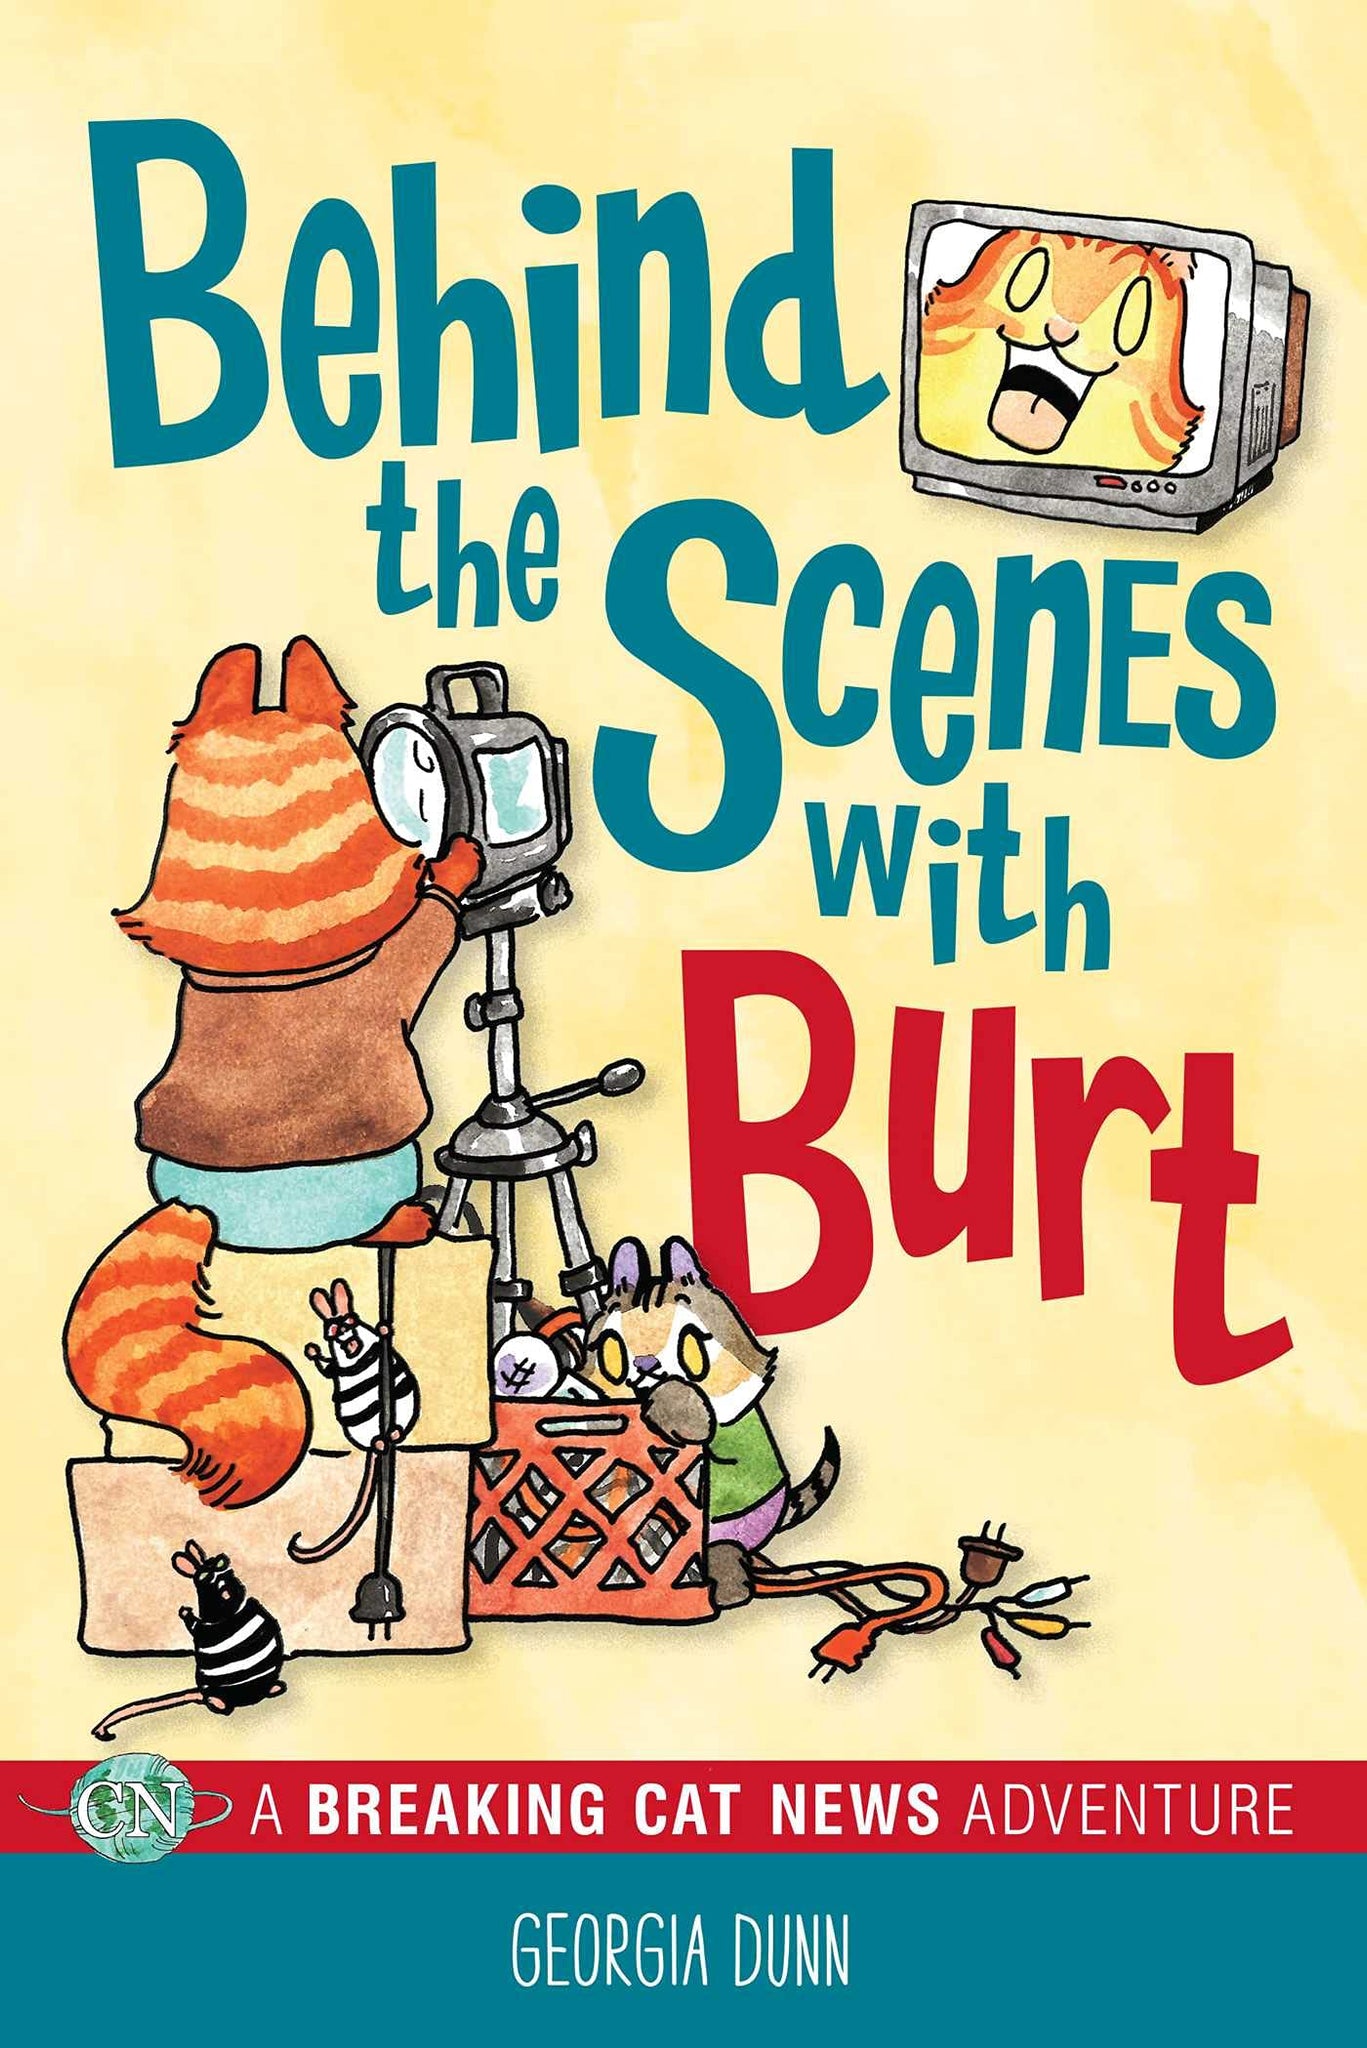 Behind the Scenes with Burt : A Breaking Cat News Adventure by Georgia Dunn